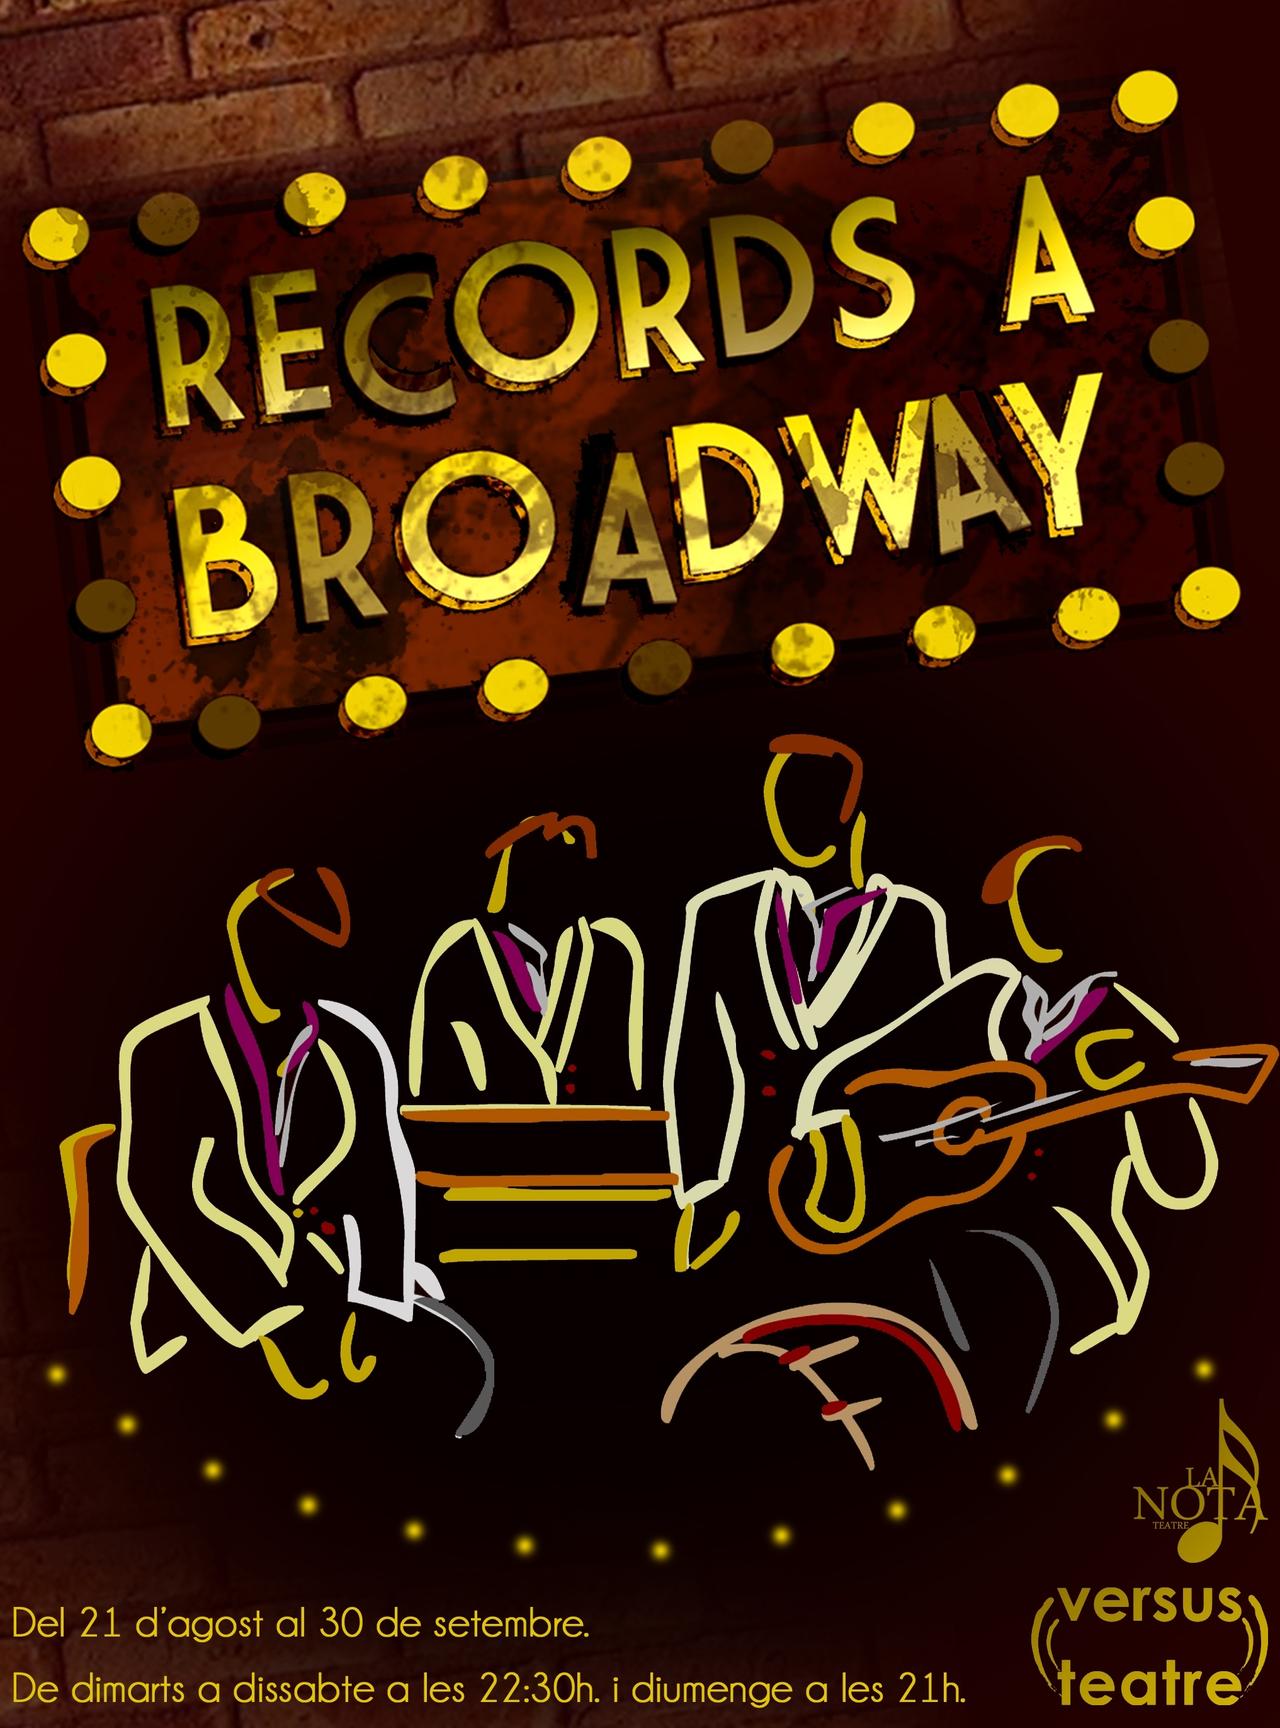 Records a Broadway